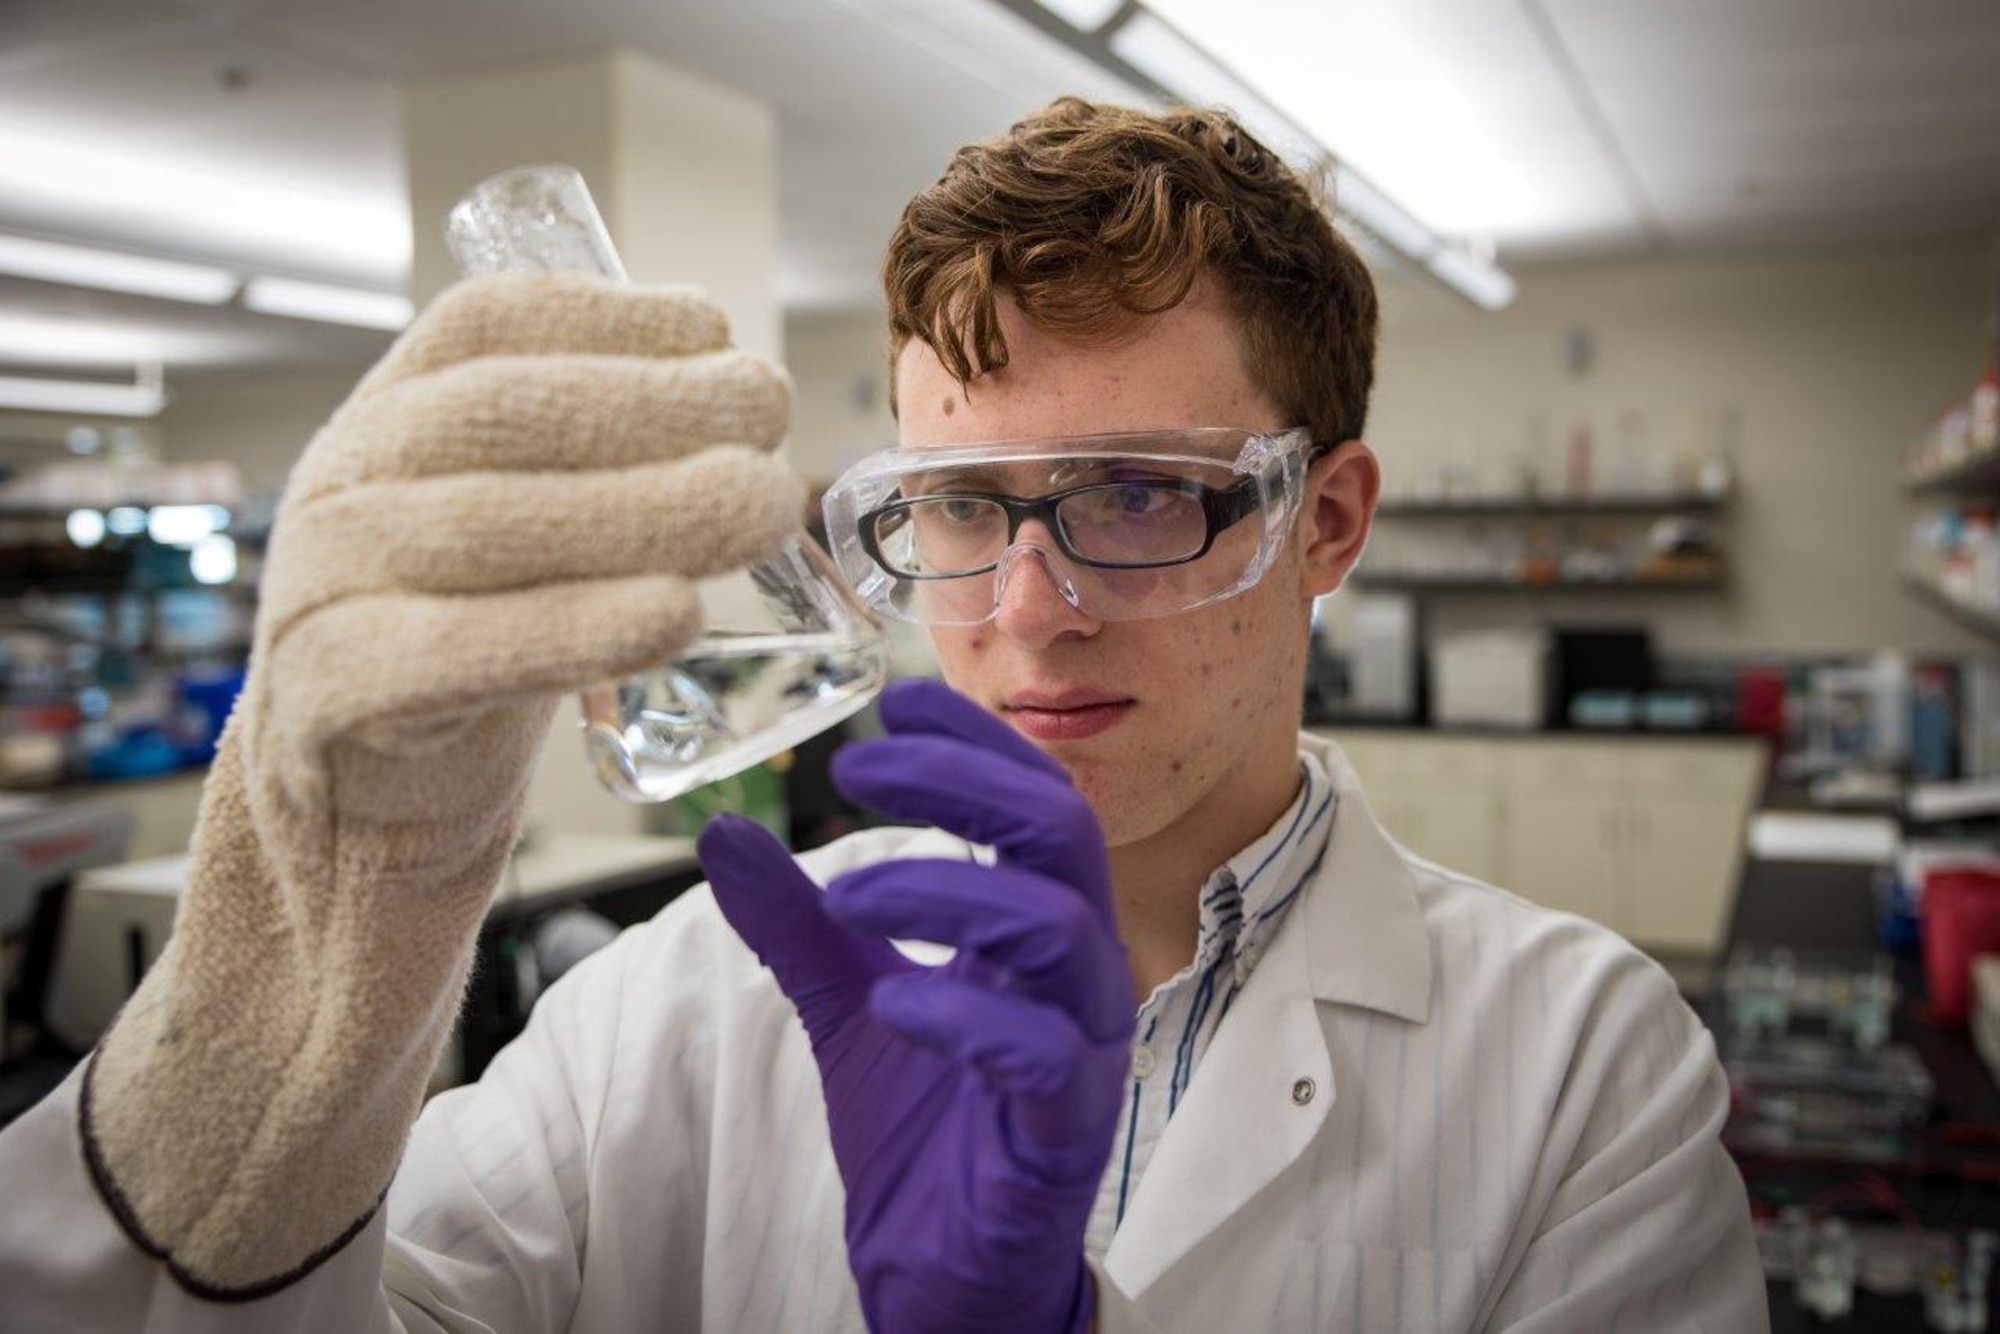 Peter Menart, member of the Air Force Research Laboratory-Carroll High School iGEM team, examines liquid in a beaker during the laboratory phase of the team’s project prior to the iGEM competition in Boston.  (U.S. Air Force photo/Richard Eldridge)